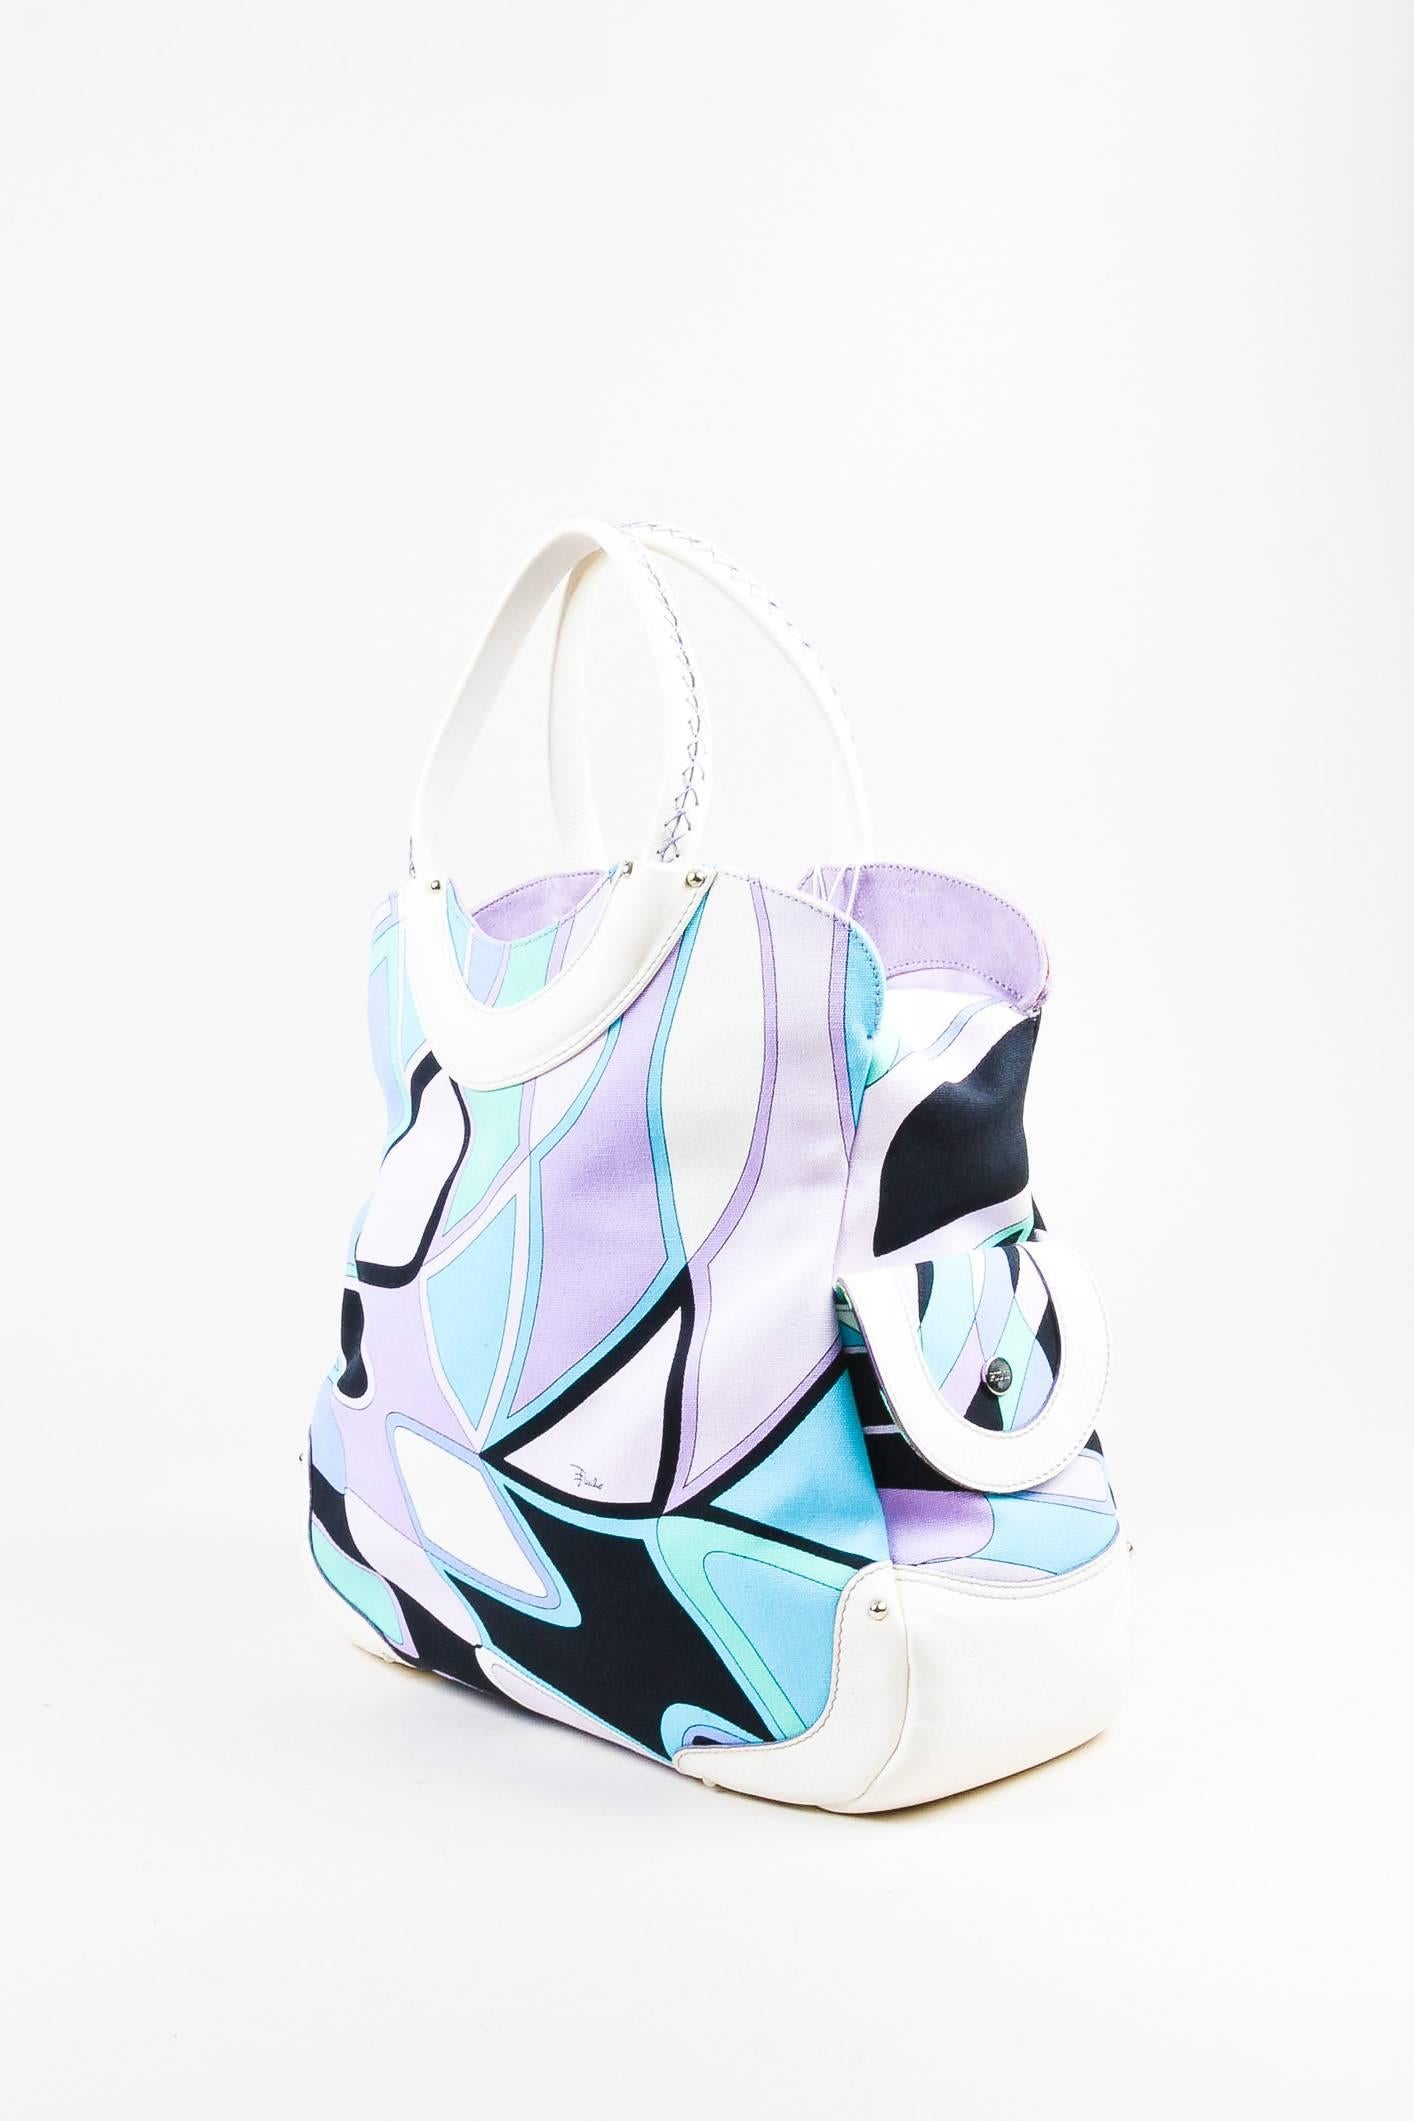 Made In: Italy

Fabric Content: Cotton; Trim: Deer, Kidskin; Lining: Polyester

Item Specifics & Details: Comes with dust bag. Multicolor abstract printed handbag with front pockets. Two pouch pockets, top two flaps are decorative. Purple suede